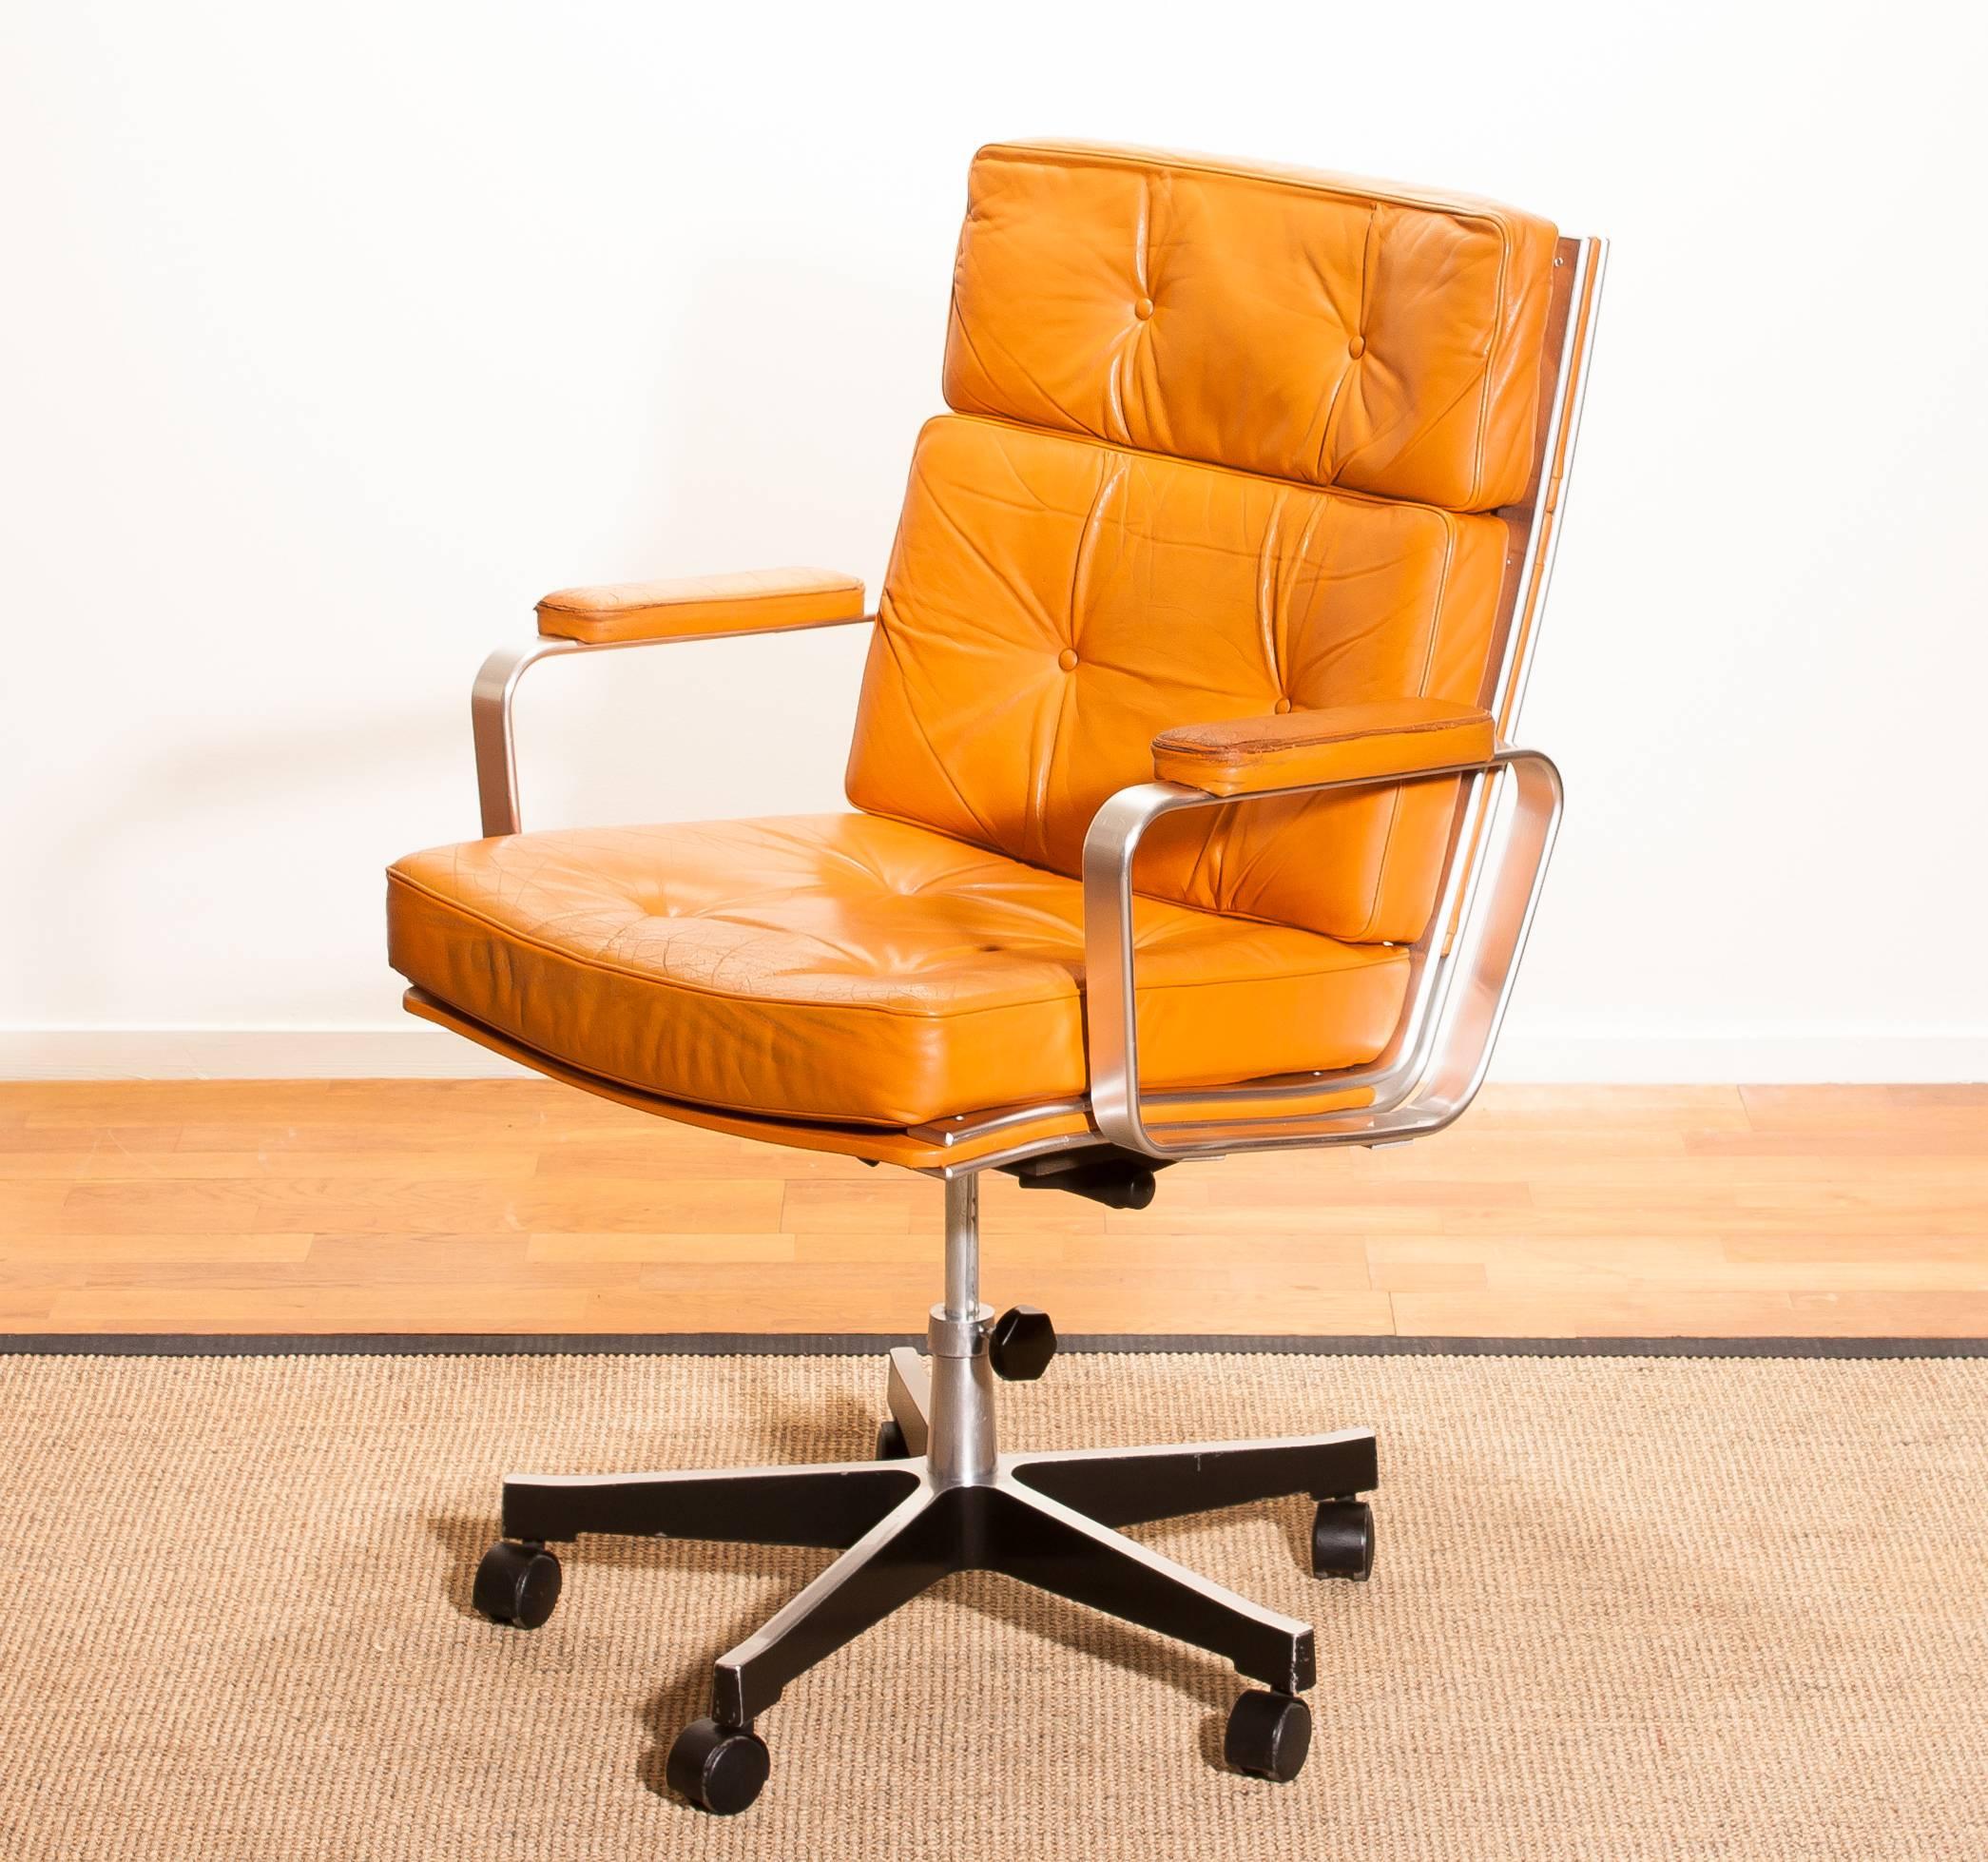 1970s office chair